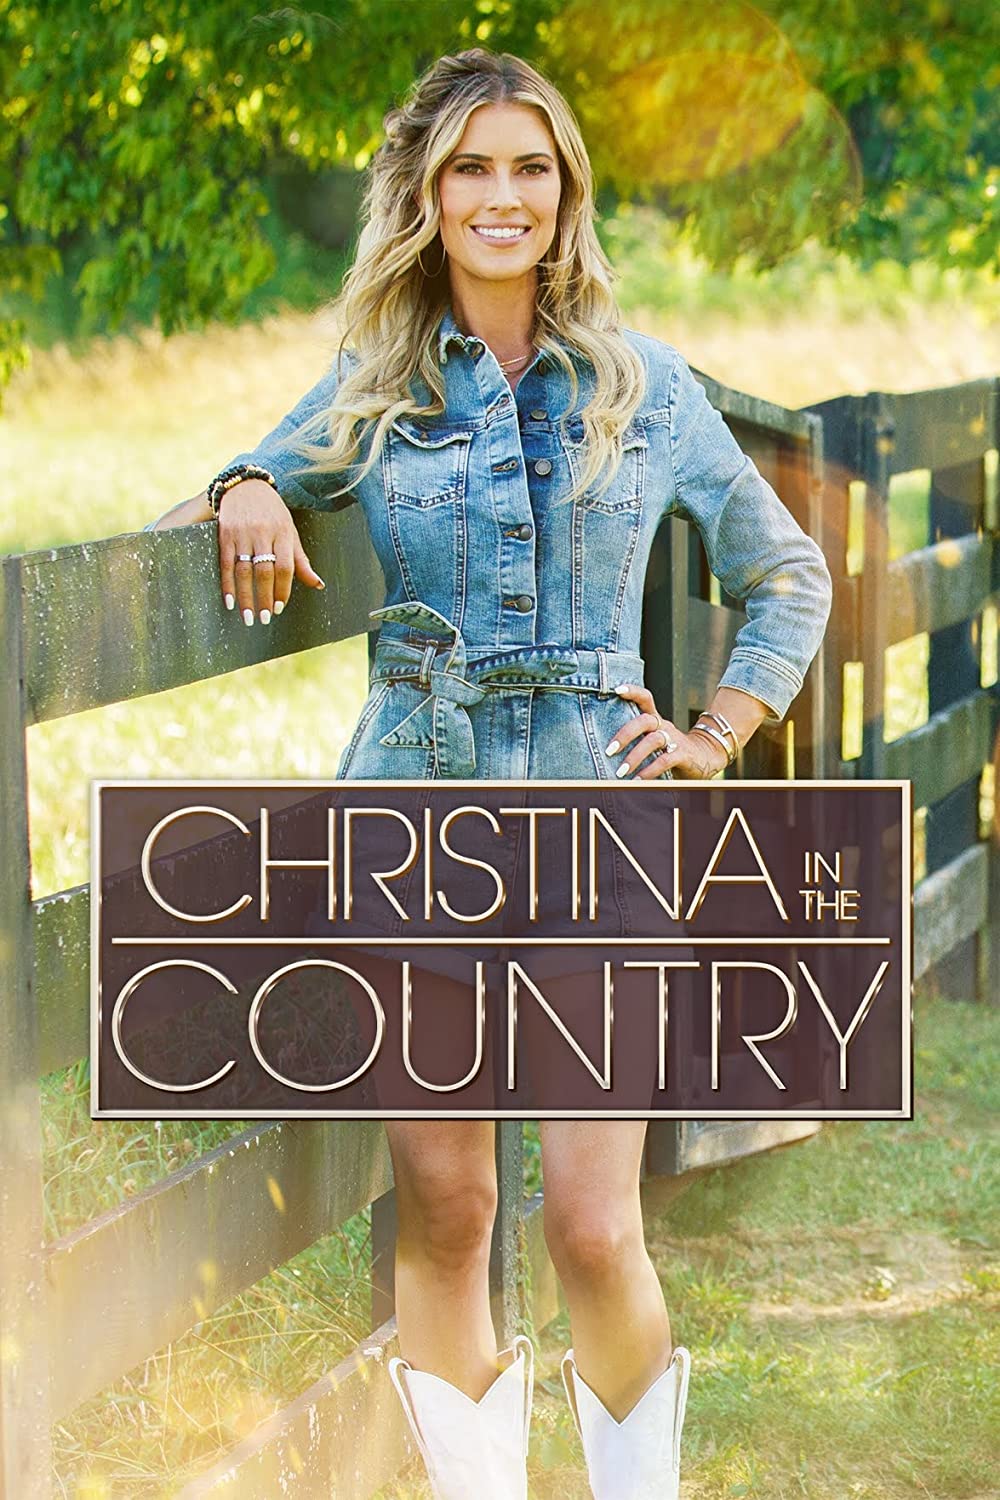 Christina in the Country - Season 1